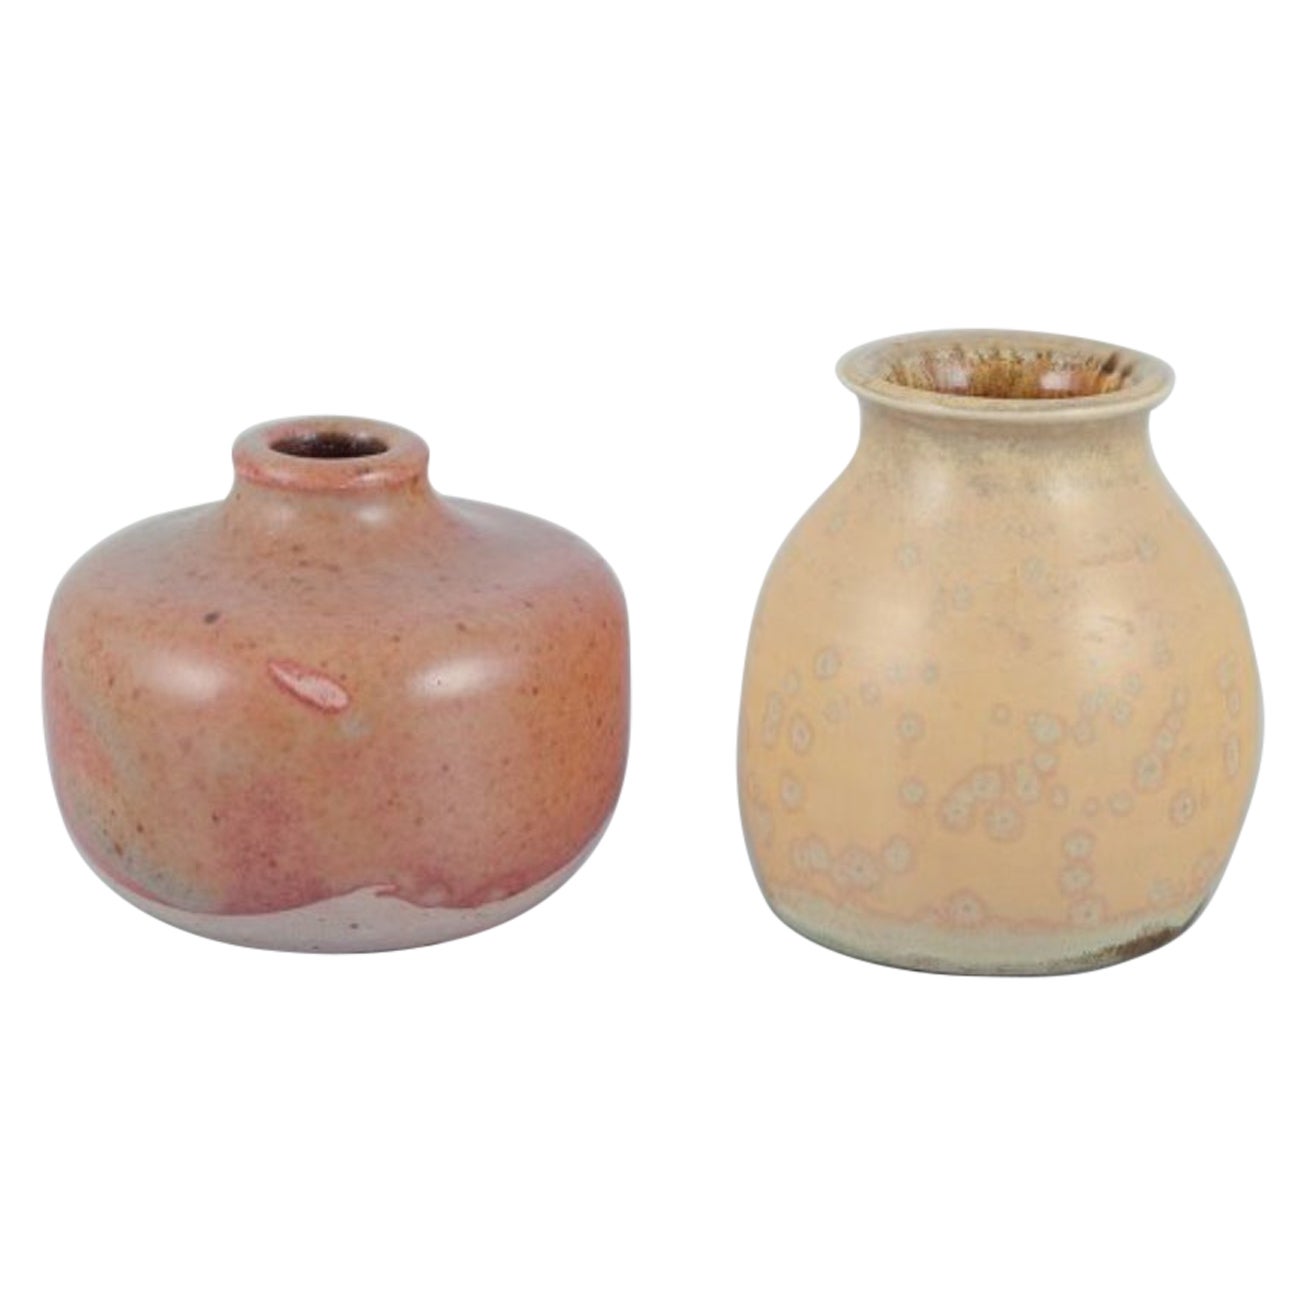 Elly Kuch and Wilhelm Kuch. Two unique ceramic vases. 1980s